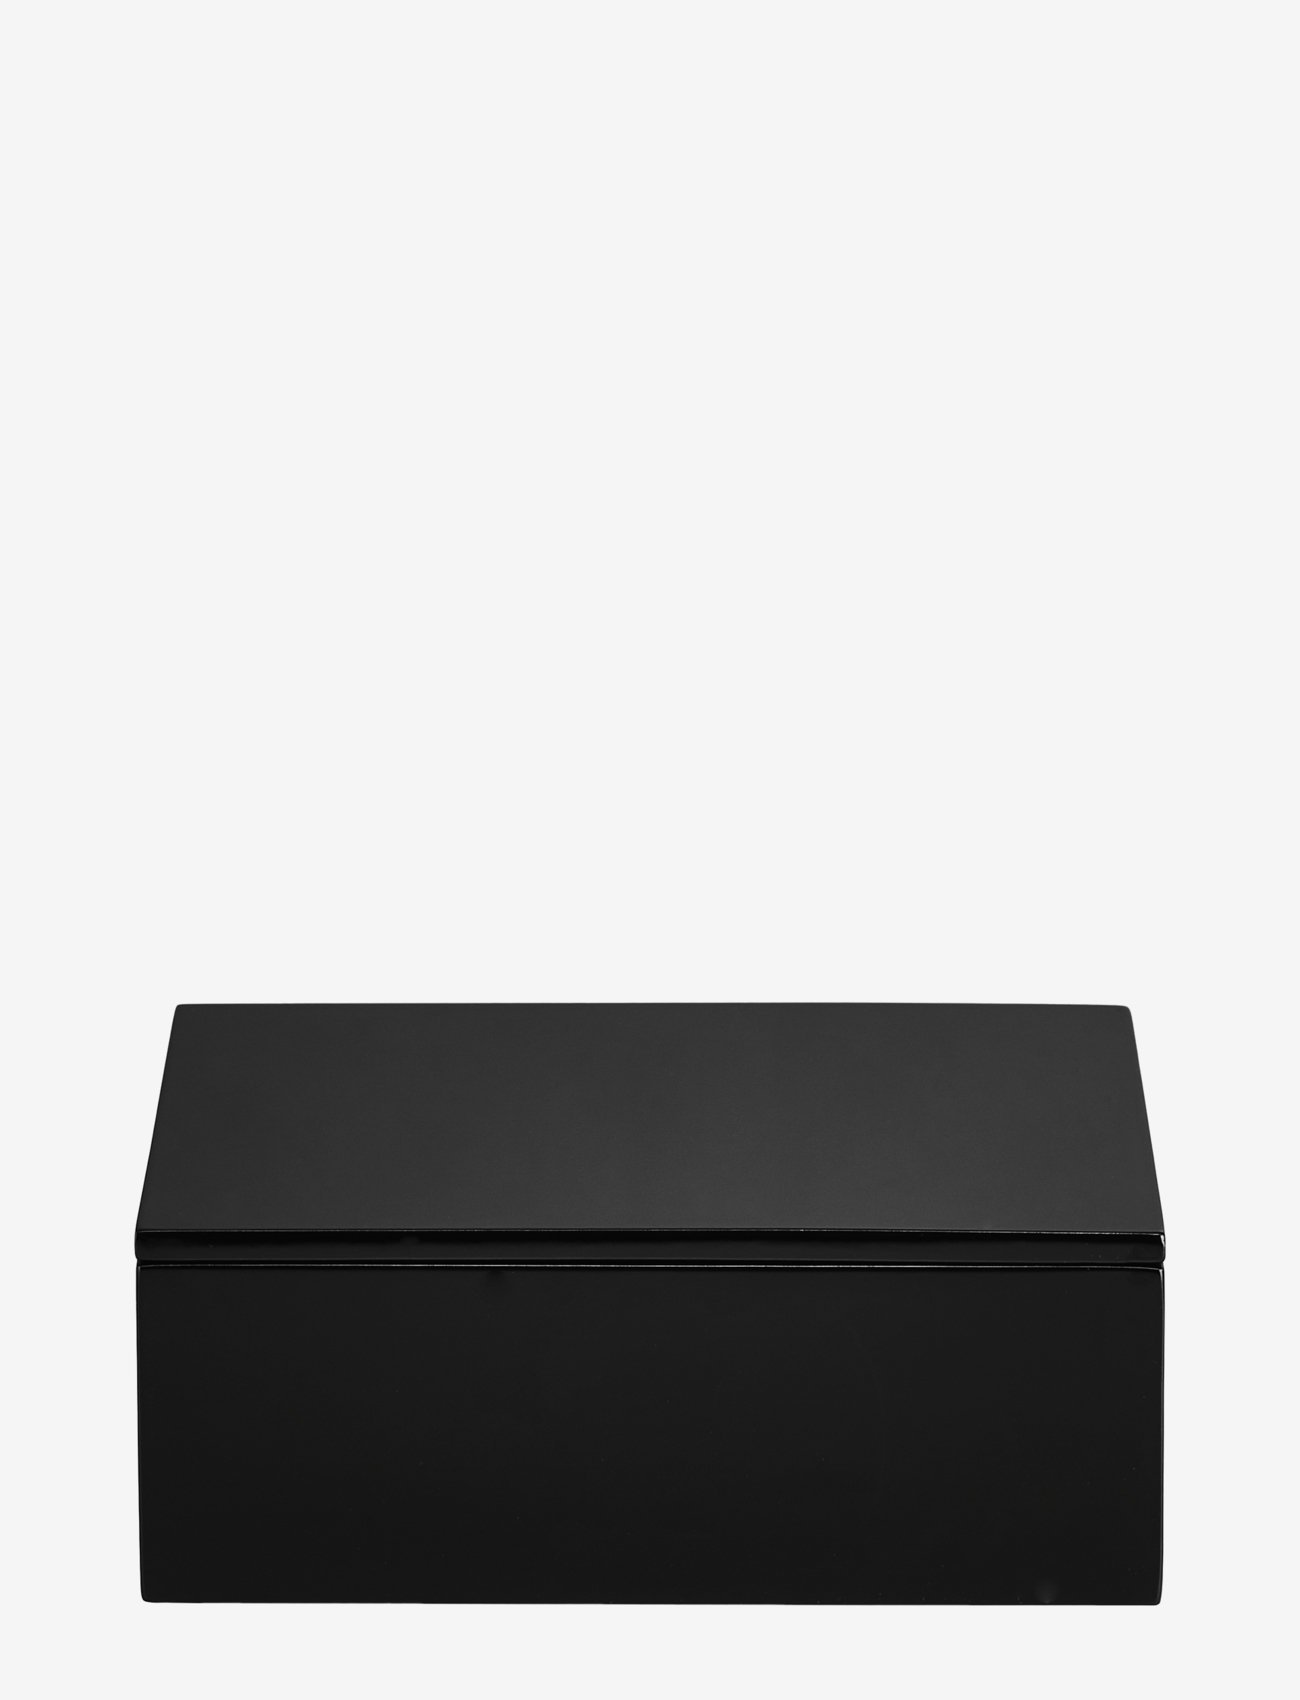 Mojoo - Lux Lacquer Box - juhlamuotia outlet-hintaan - black - 0